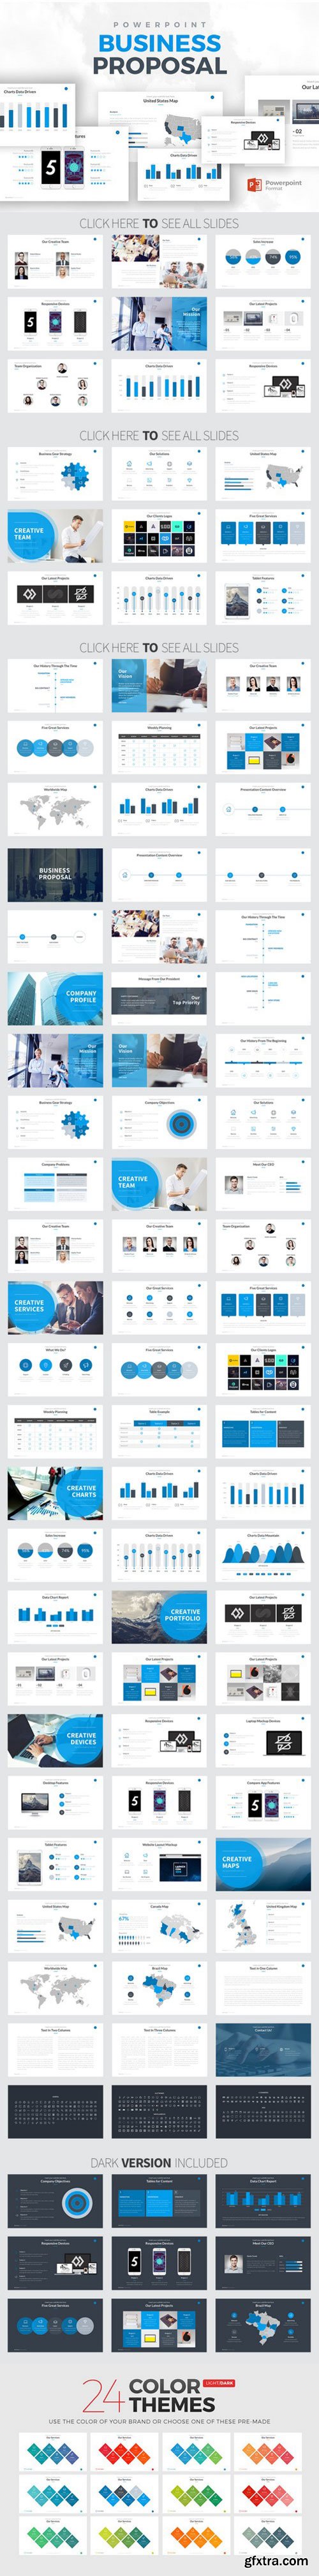 Business Proposal PowerPoint